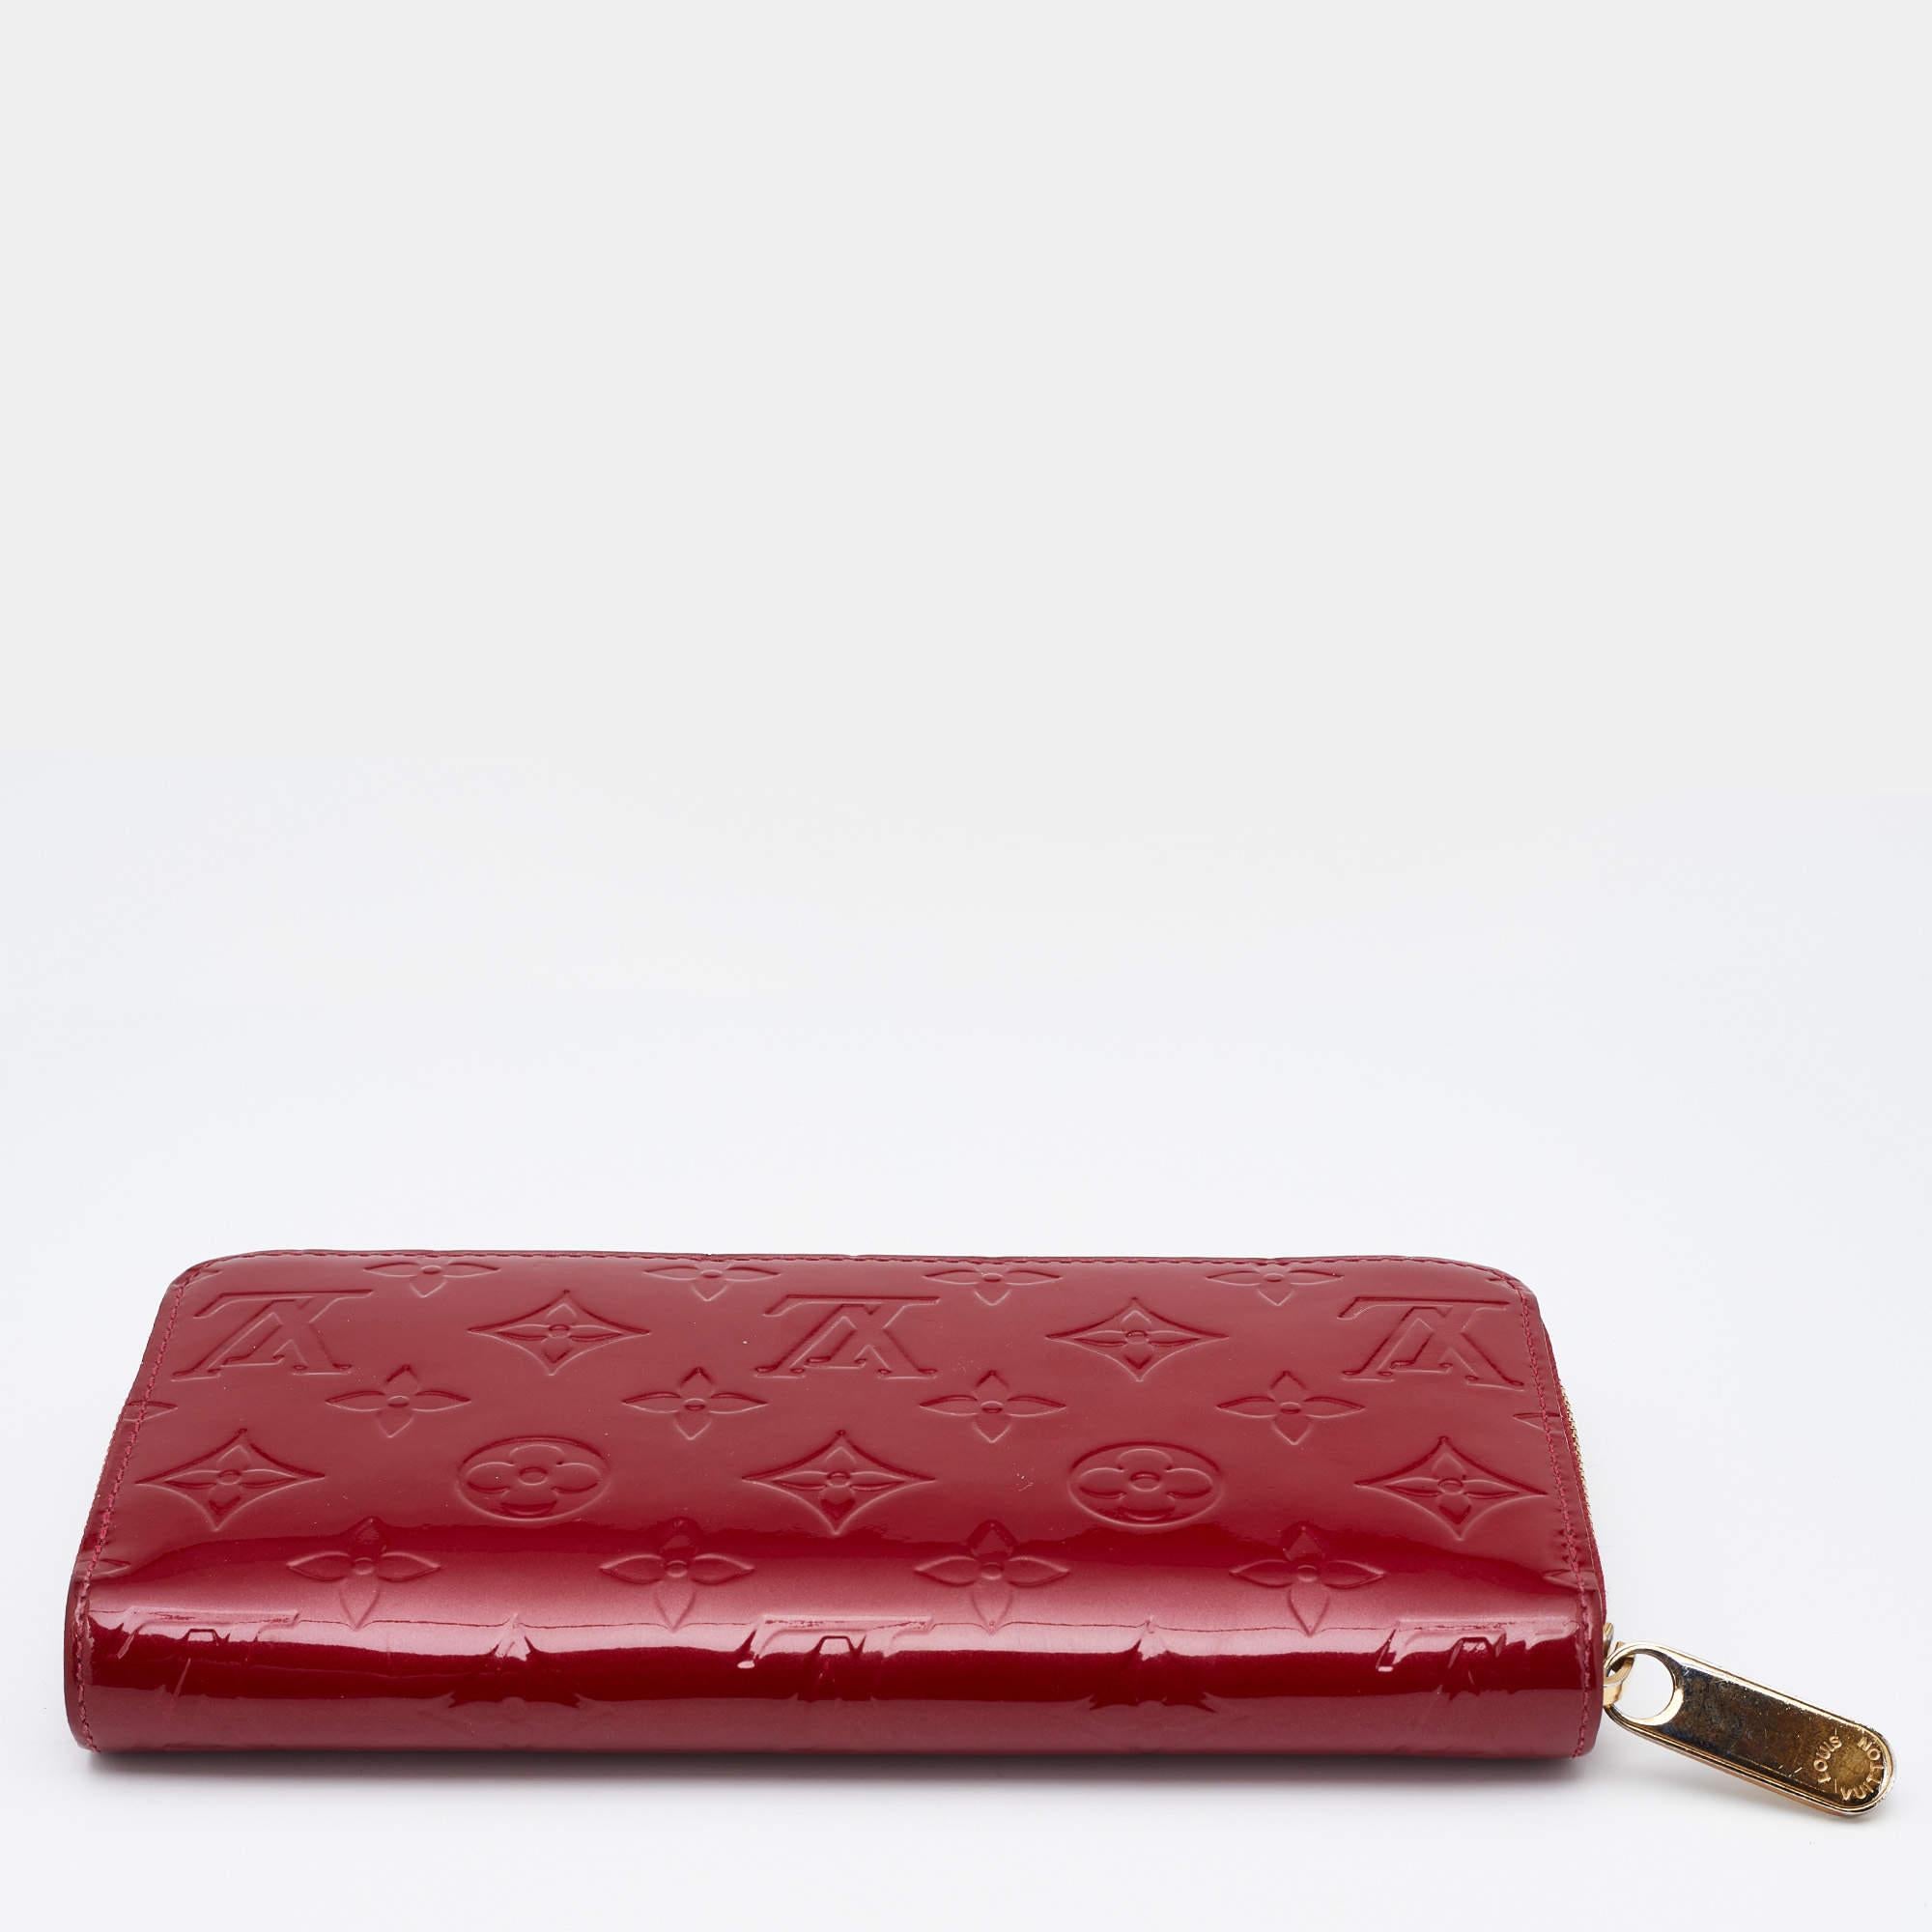 This Louis Vuitton Zippy wallet is conveniently designed for everyday use. Crafted from Pomme D’amour Monogram Vernis canvas, it is paired with a zip-around closure and gold-tone hardware. The compartmentalized interior of the wallet will store your